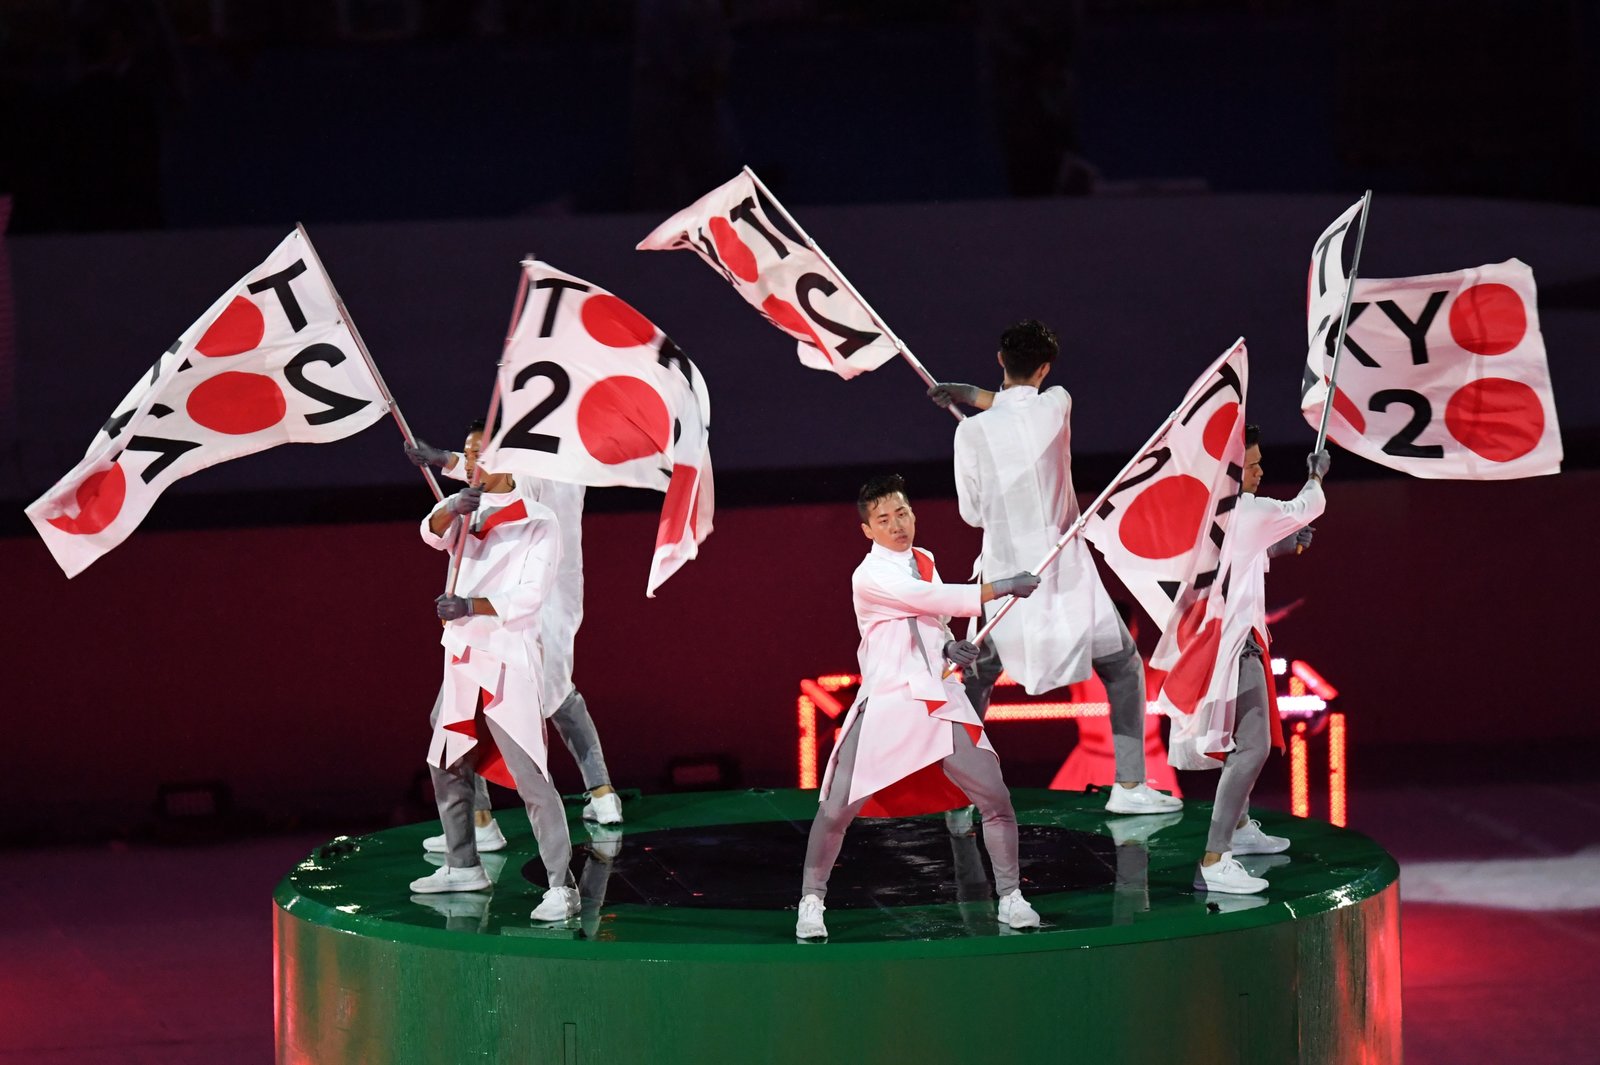 Dancers wave flags ushering in excitement for the 2020 Summer Olympics which will be held in Tokyo.